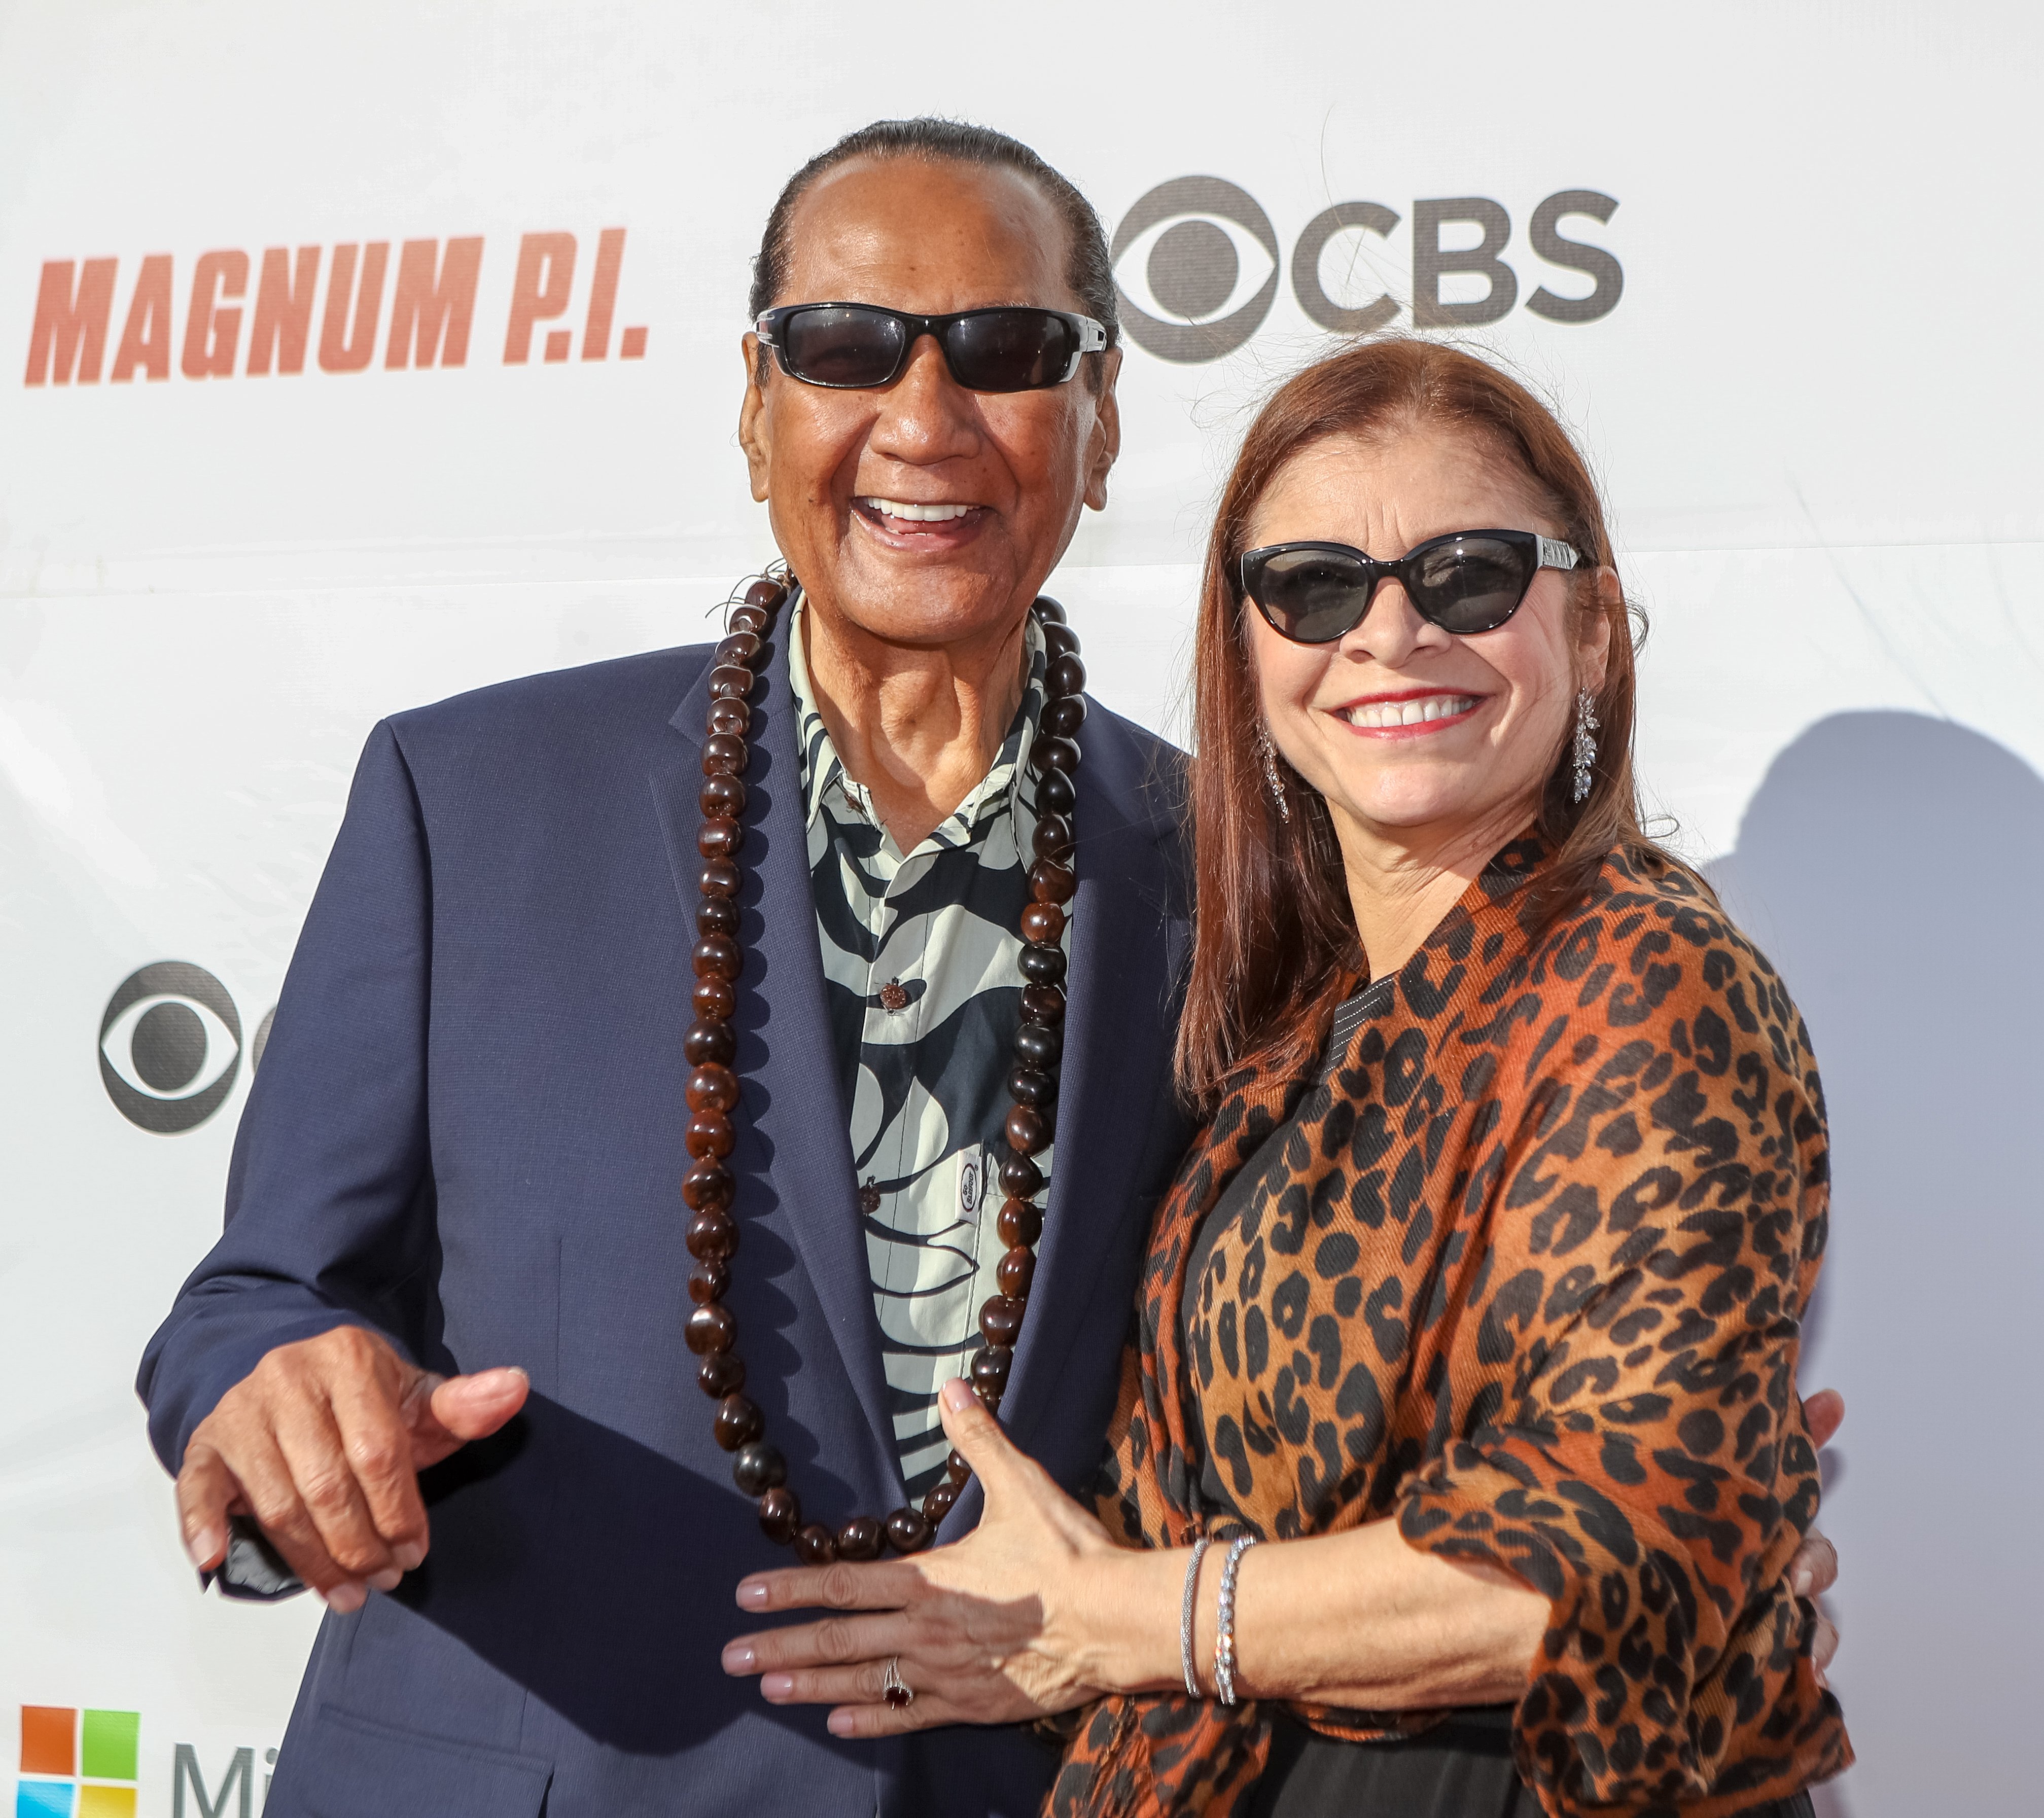 Al Harrington and his wife, Rosa, at the Sunset on the Beach event celebrating the 50th anniversary of "Hawaii Five-0" on September 16, 2018, in Waikiki, Hawaii | Photo: Darryl Oumi/Getty Images